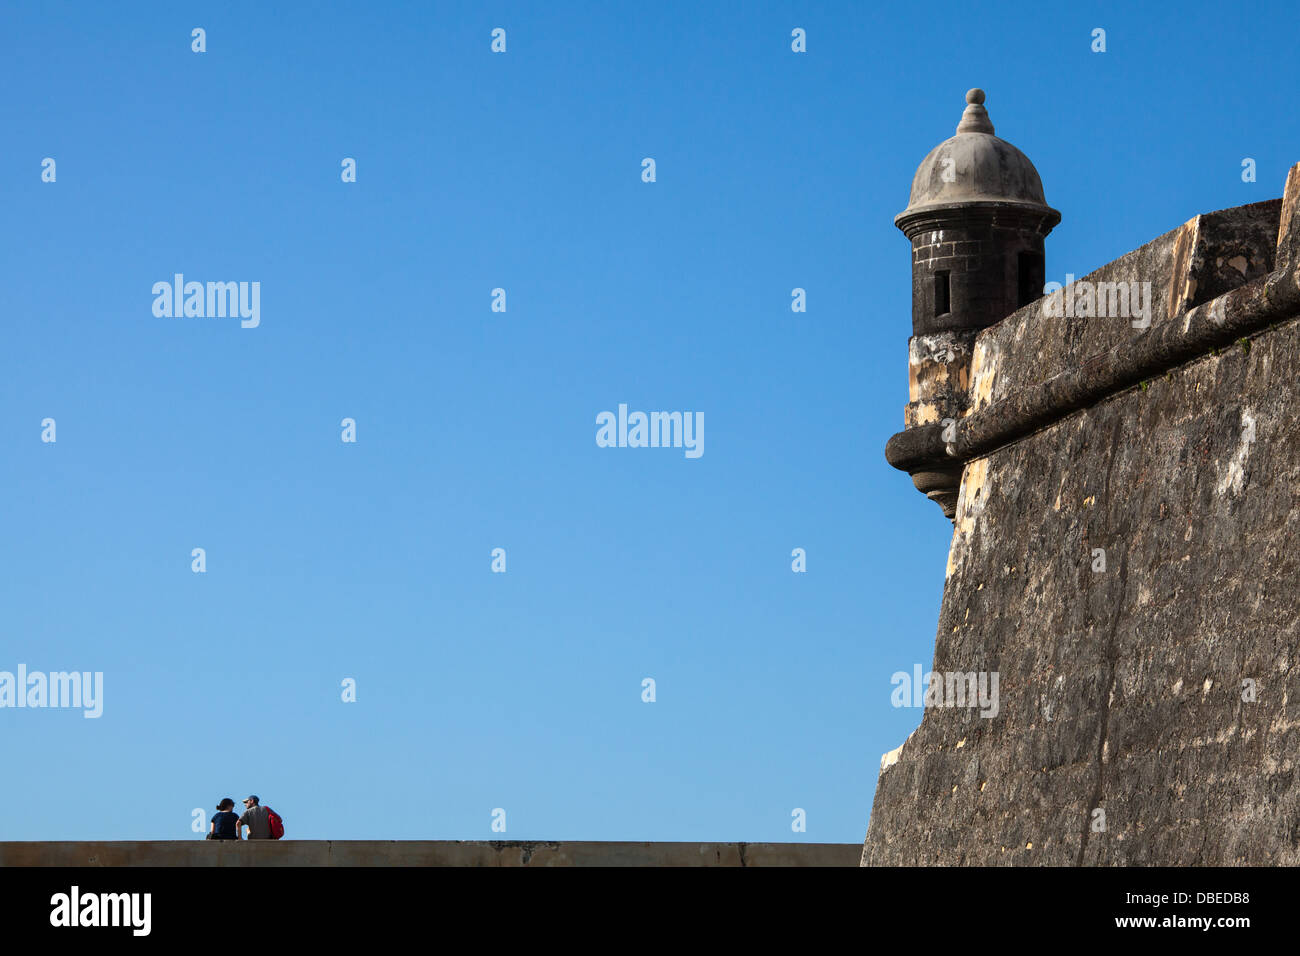 A couple sits on the wall of El Morro Fort, San Juan, Puerto Rico. Stock Photo